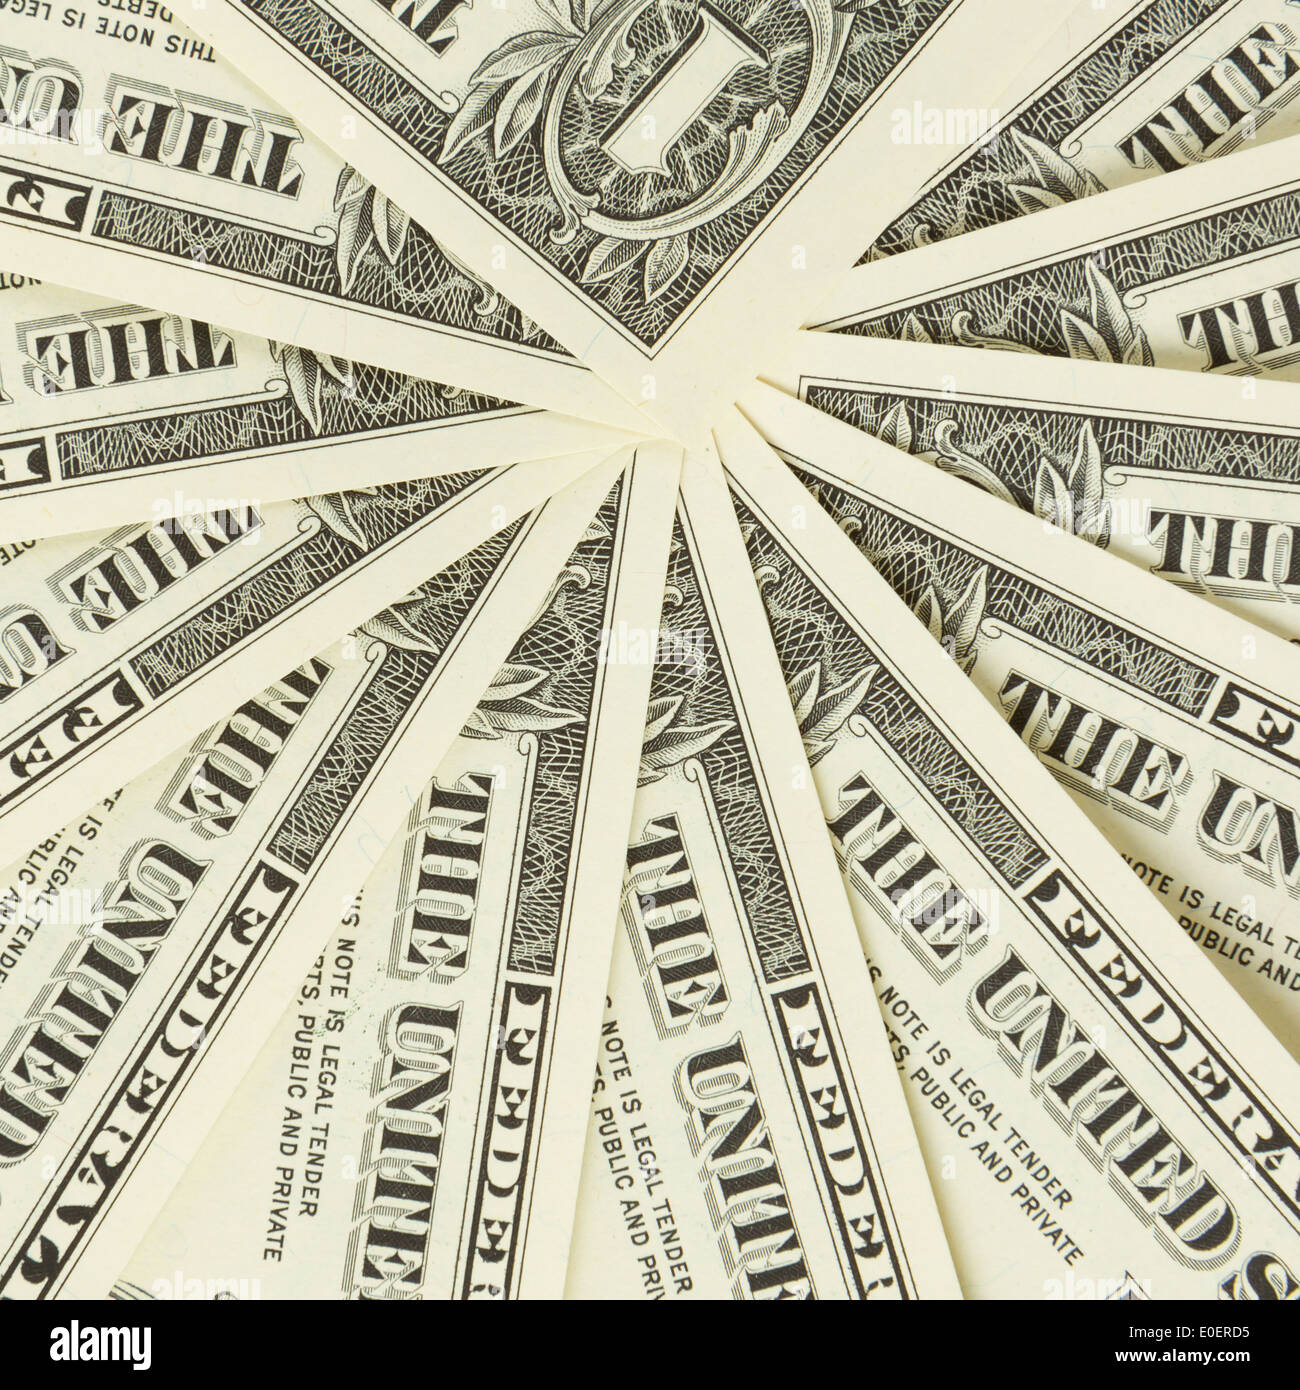 Seamlessly tileable and repeatable 1 dollar bills, US Currency Stock Photo